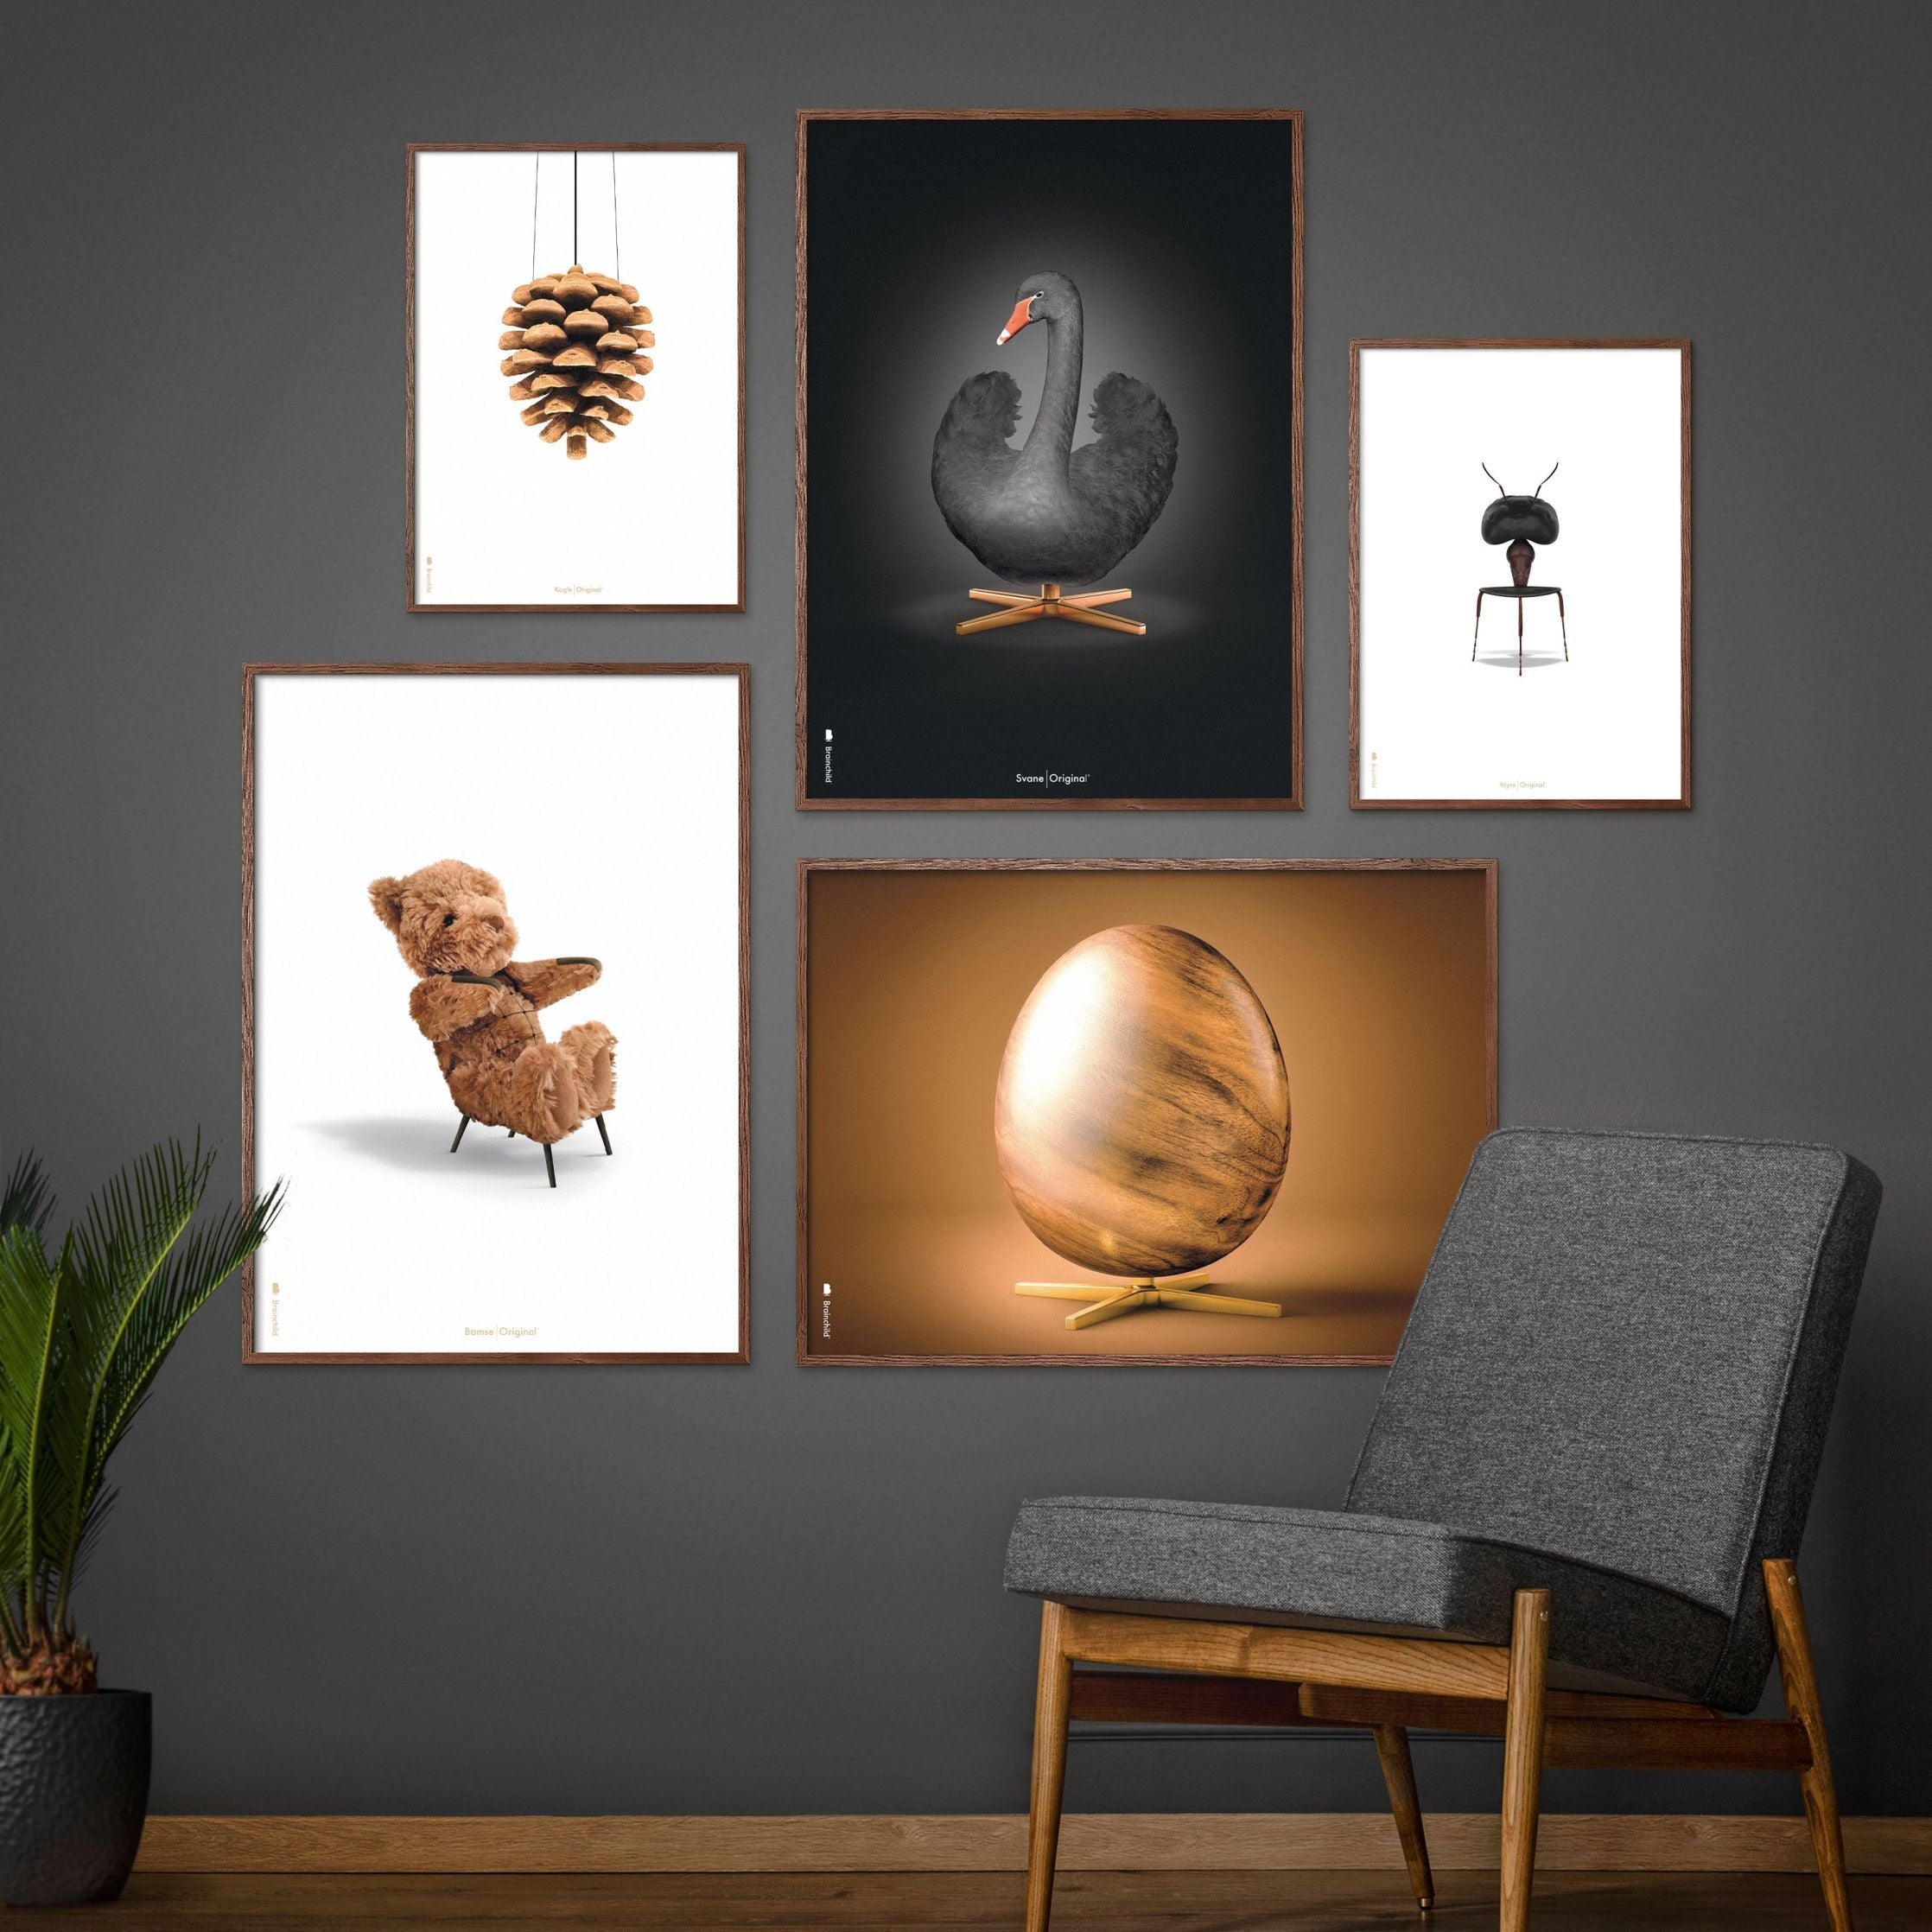 Brainchild Ant Classic Poster, Frame Made Of Light Wood A5, White Background